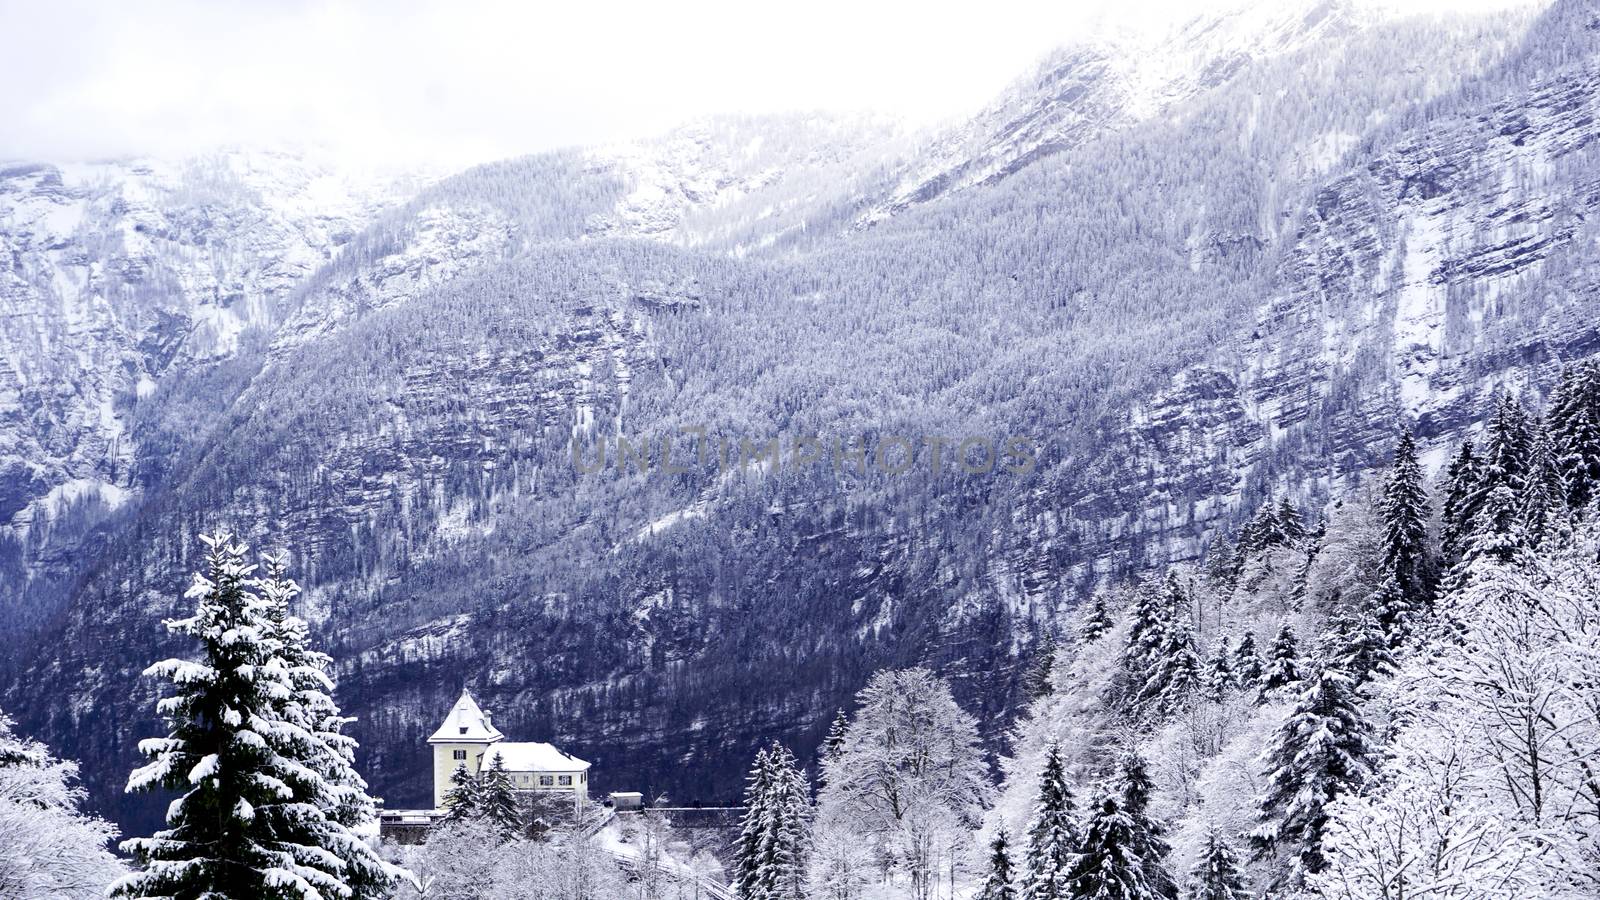 Viewpoint of Hallstatt Winter snow mountain landscape through the forest in upland valley leads to the old salt mine of Hallstatt, Austria by polarbearstudio